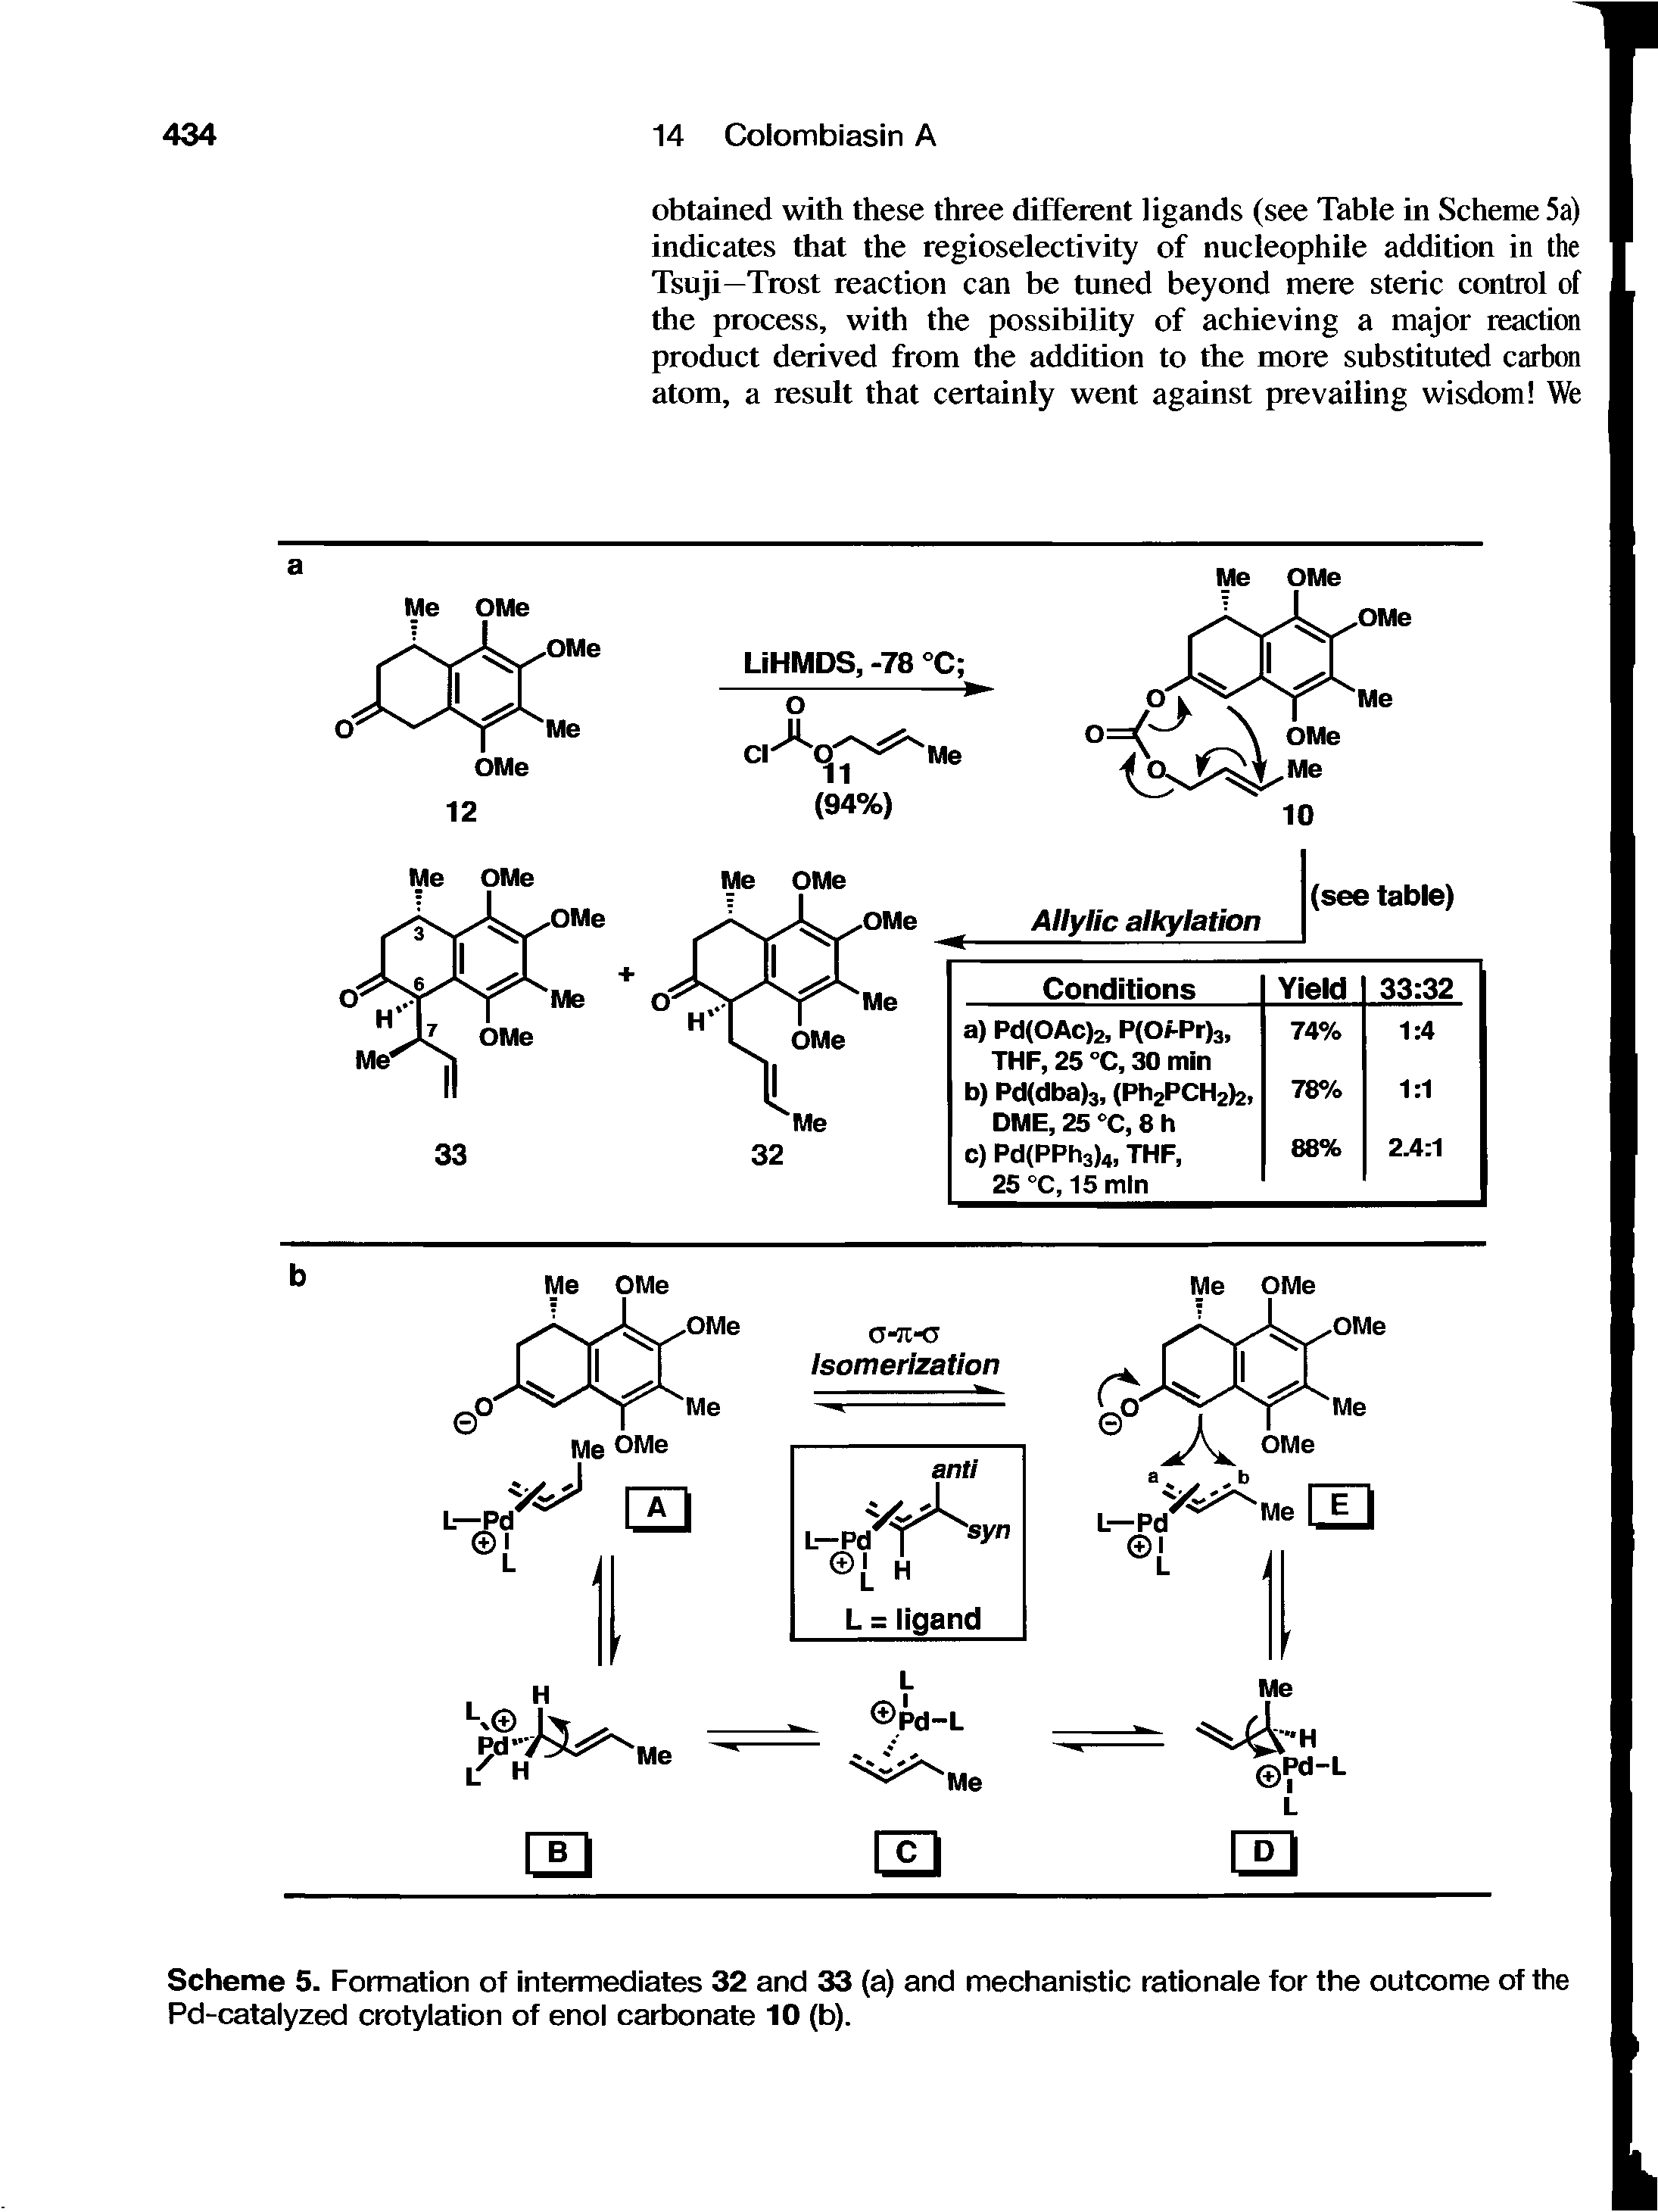 Scheme 5. Formation of intenuediates 32 and 33 (a) and mechanistic rationale for the outcome of the Pd-catalyzed crotylation of enol carbonate 10 (b).